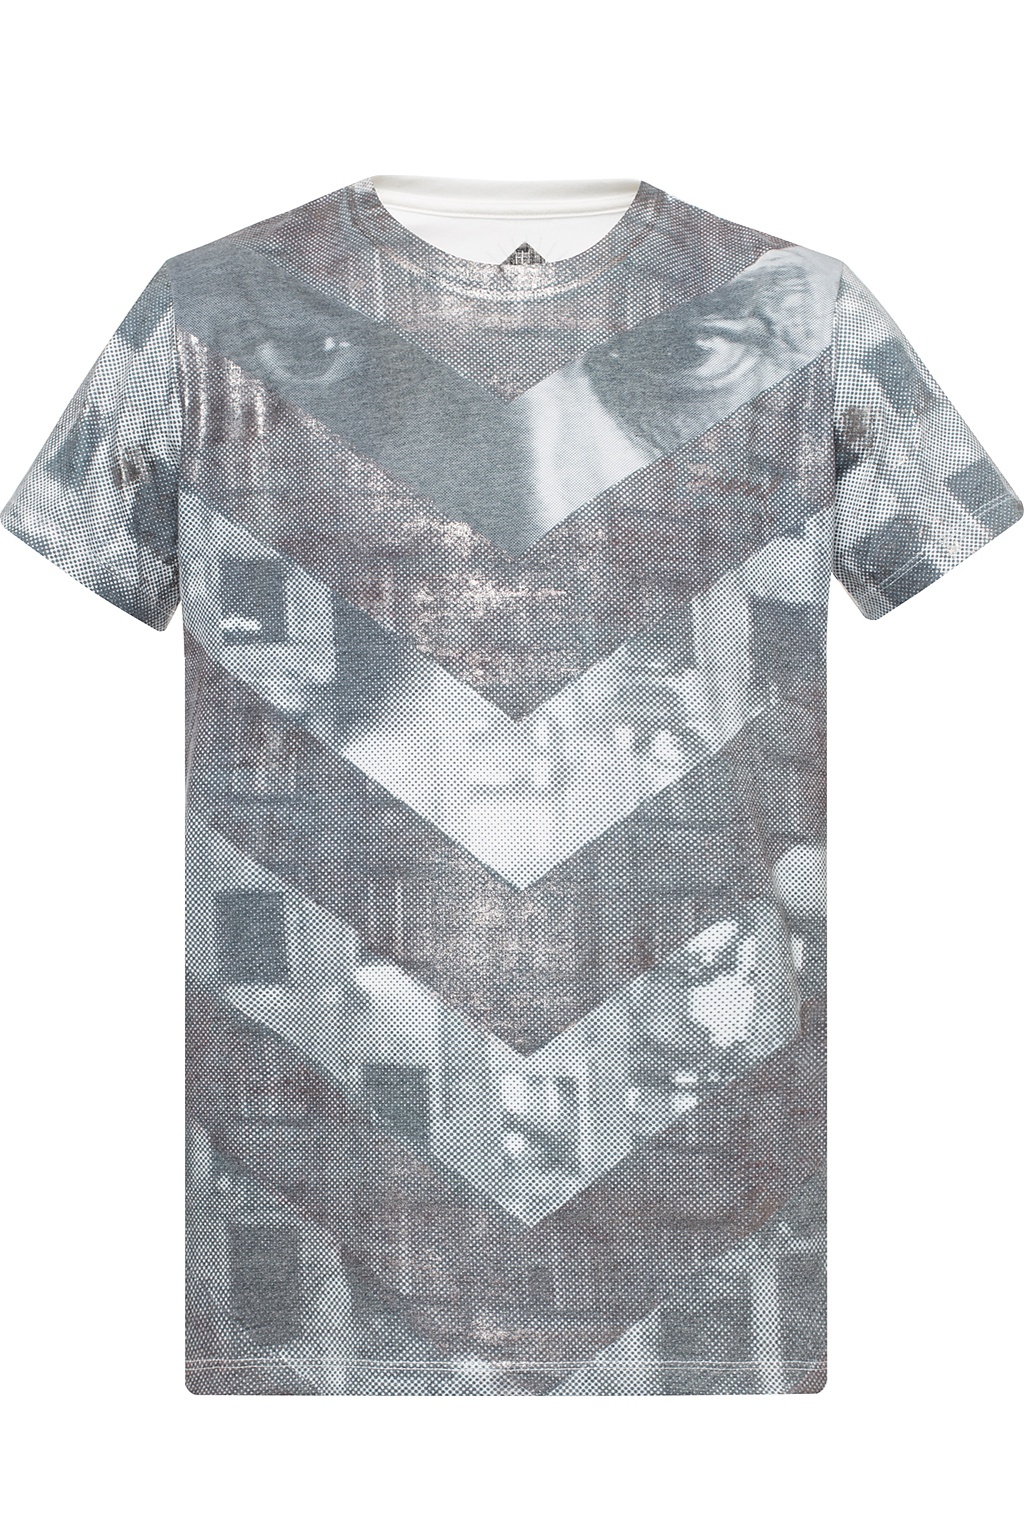 Diesel T-shirt Exclusively Designed for SneakersbeShops